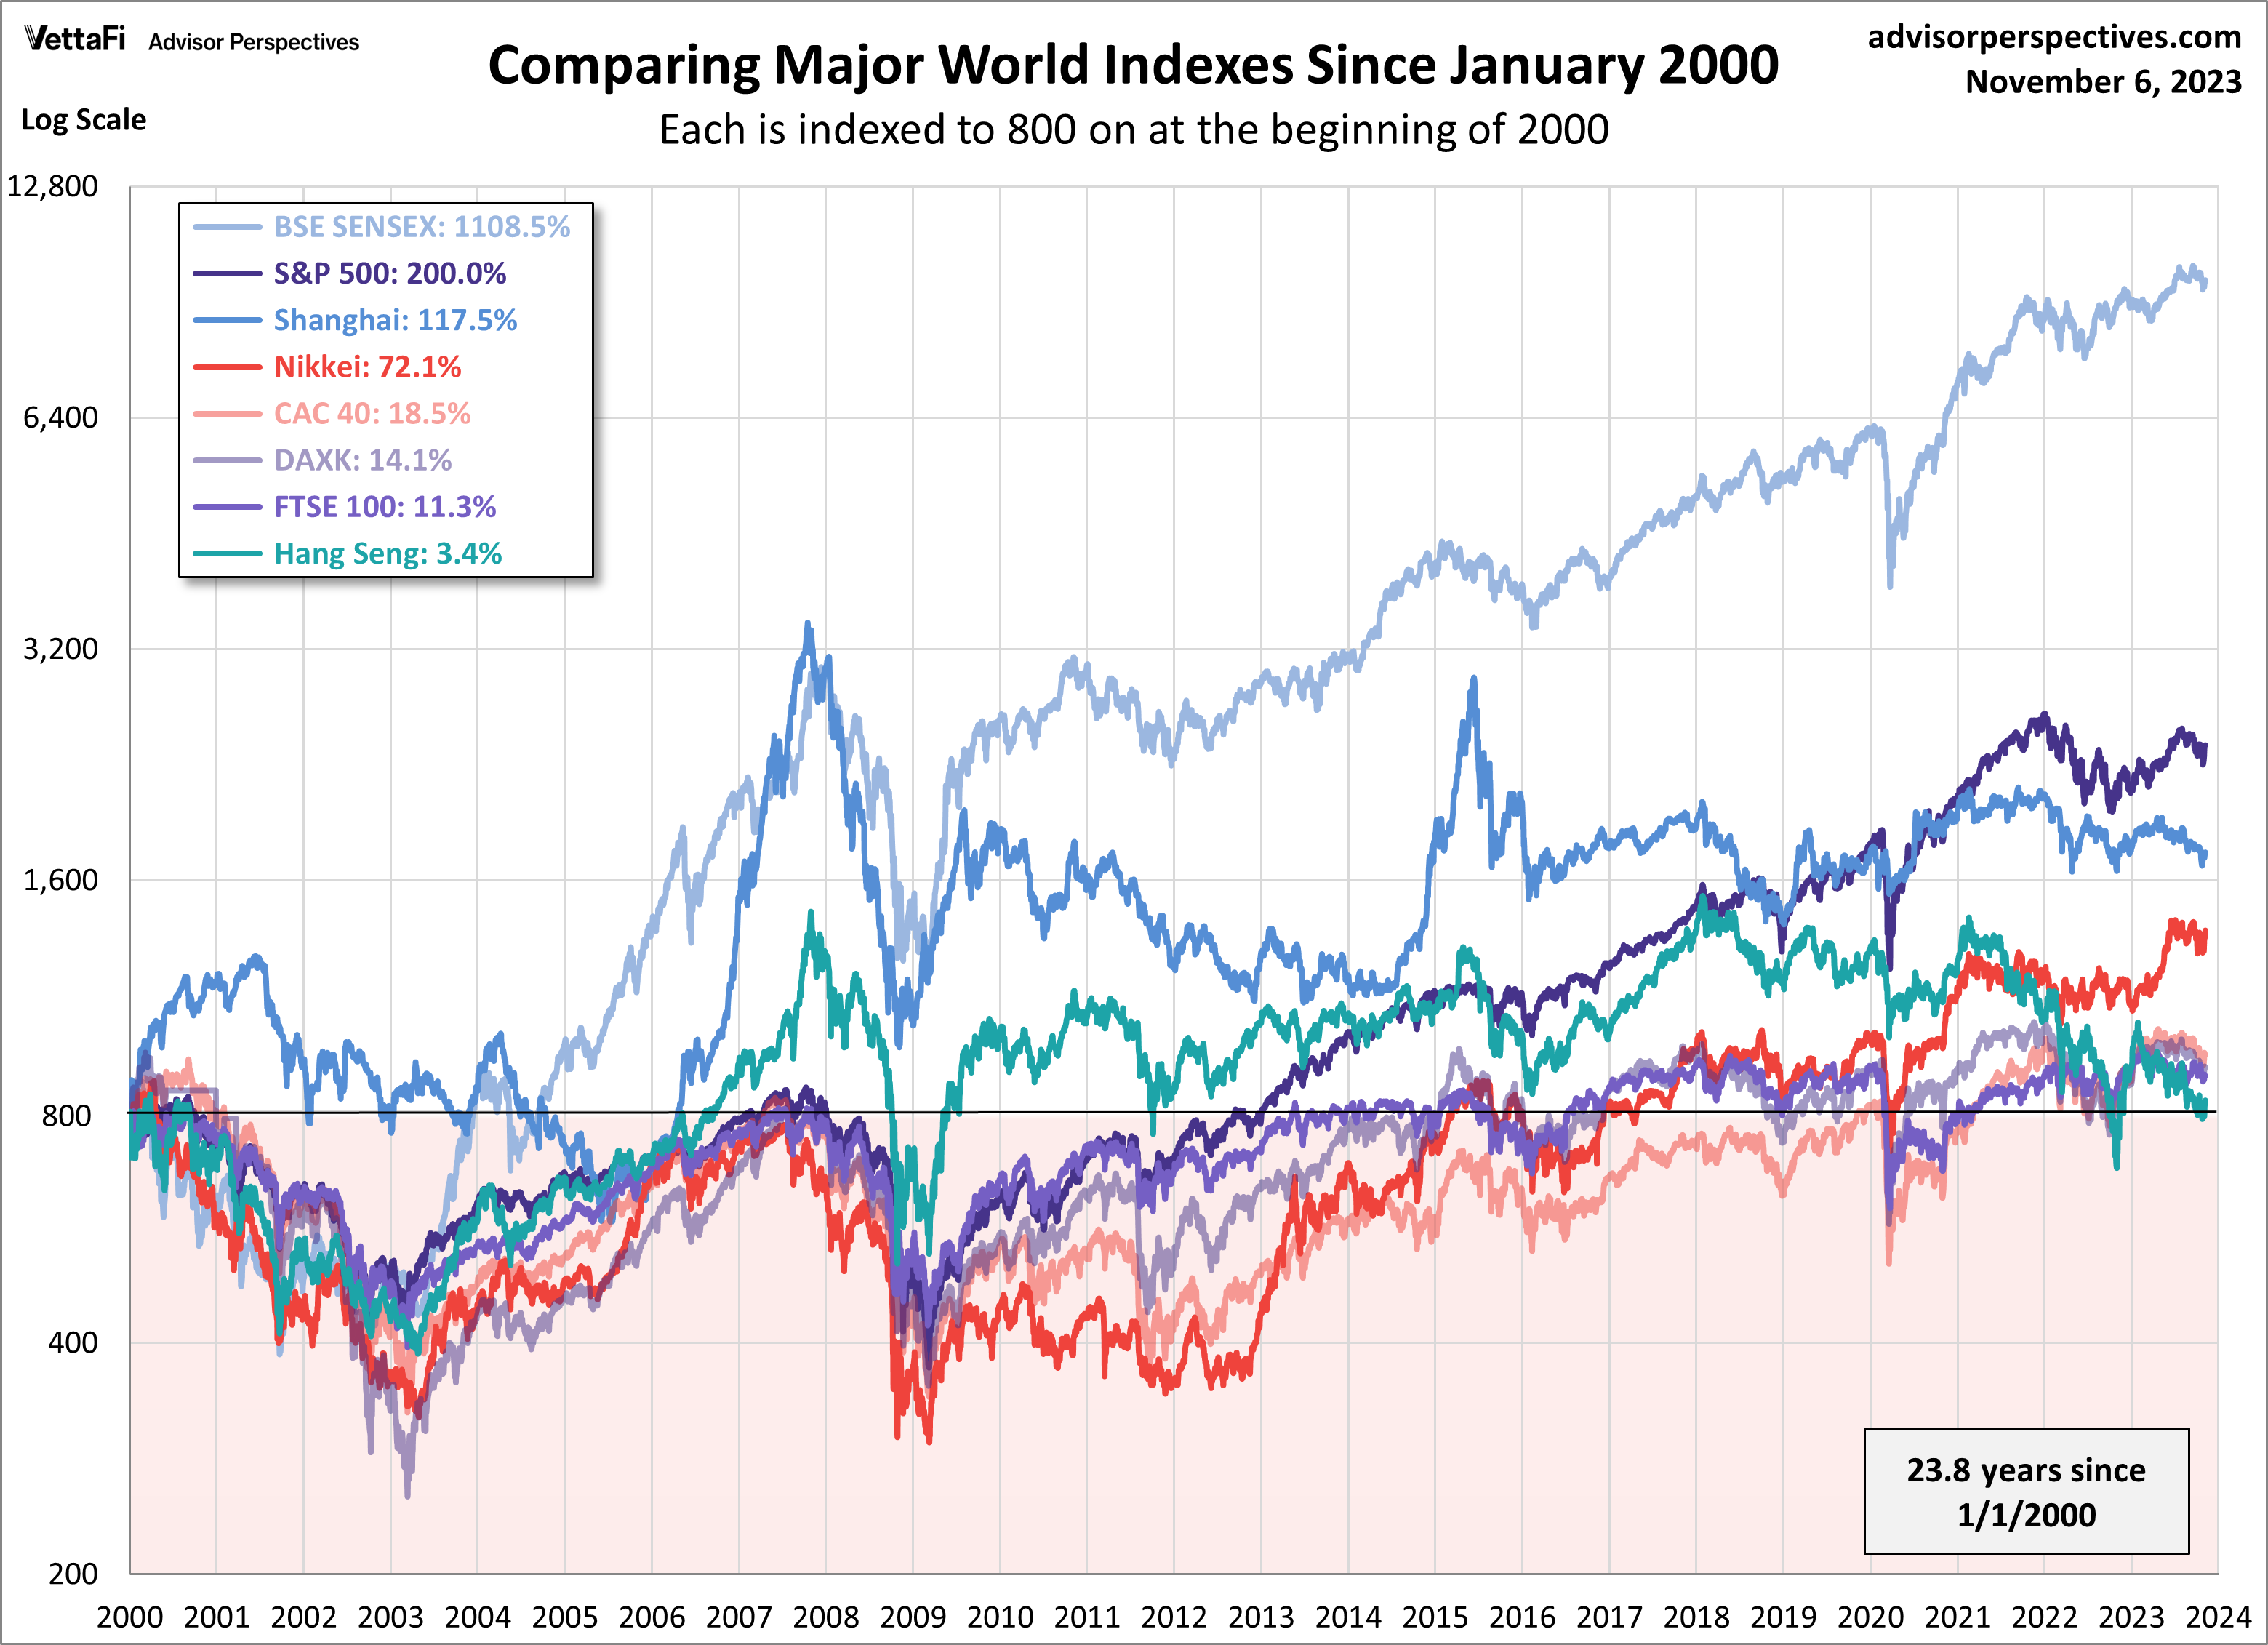 Comparing Major World Indexes since January 2020